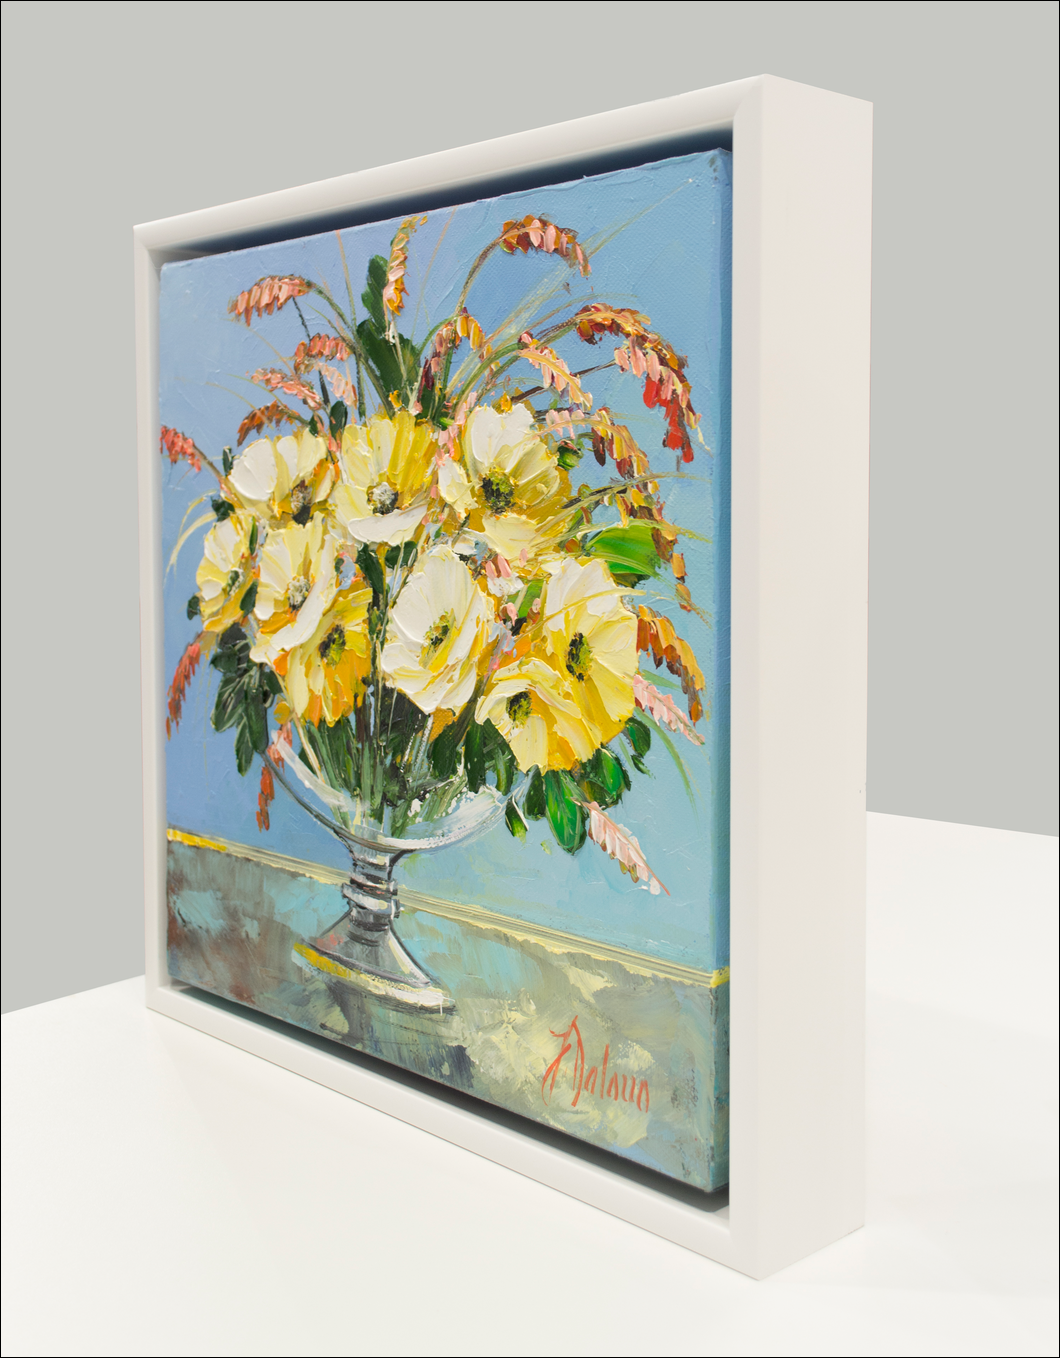 Framed Side View Of Still Life Painting "Yellow Blossom" By Judith Dalozzo